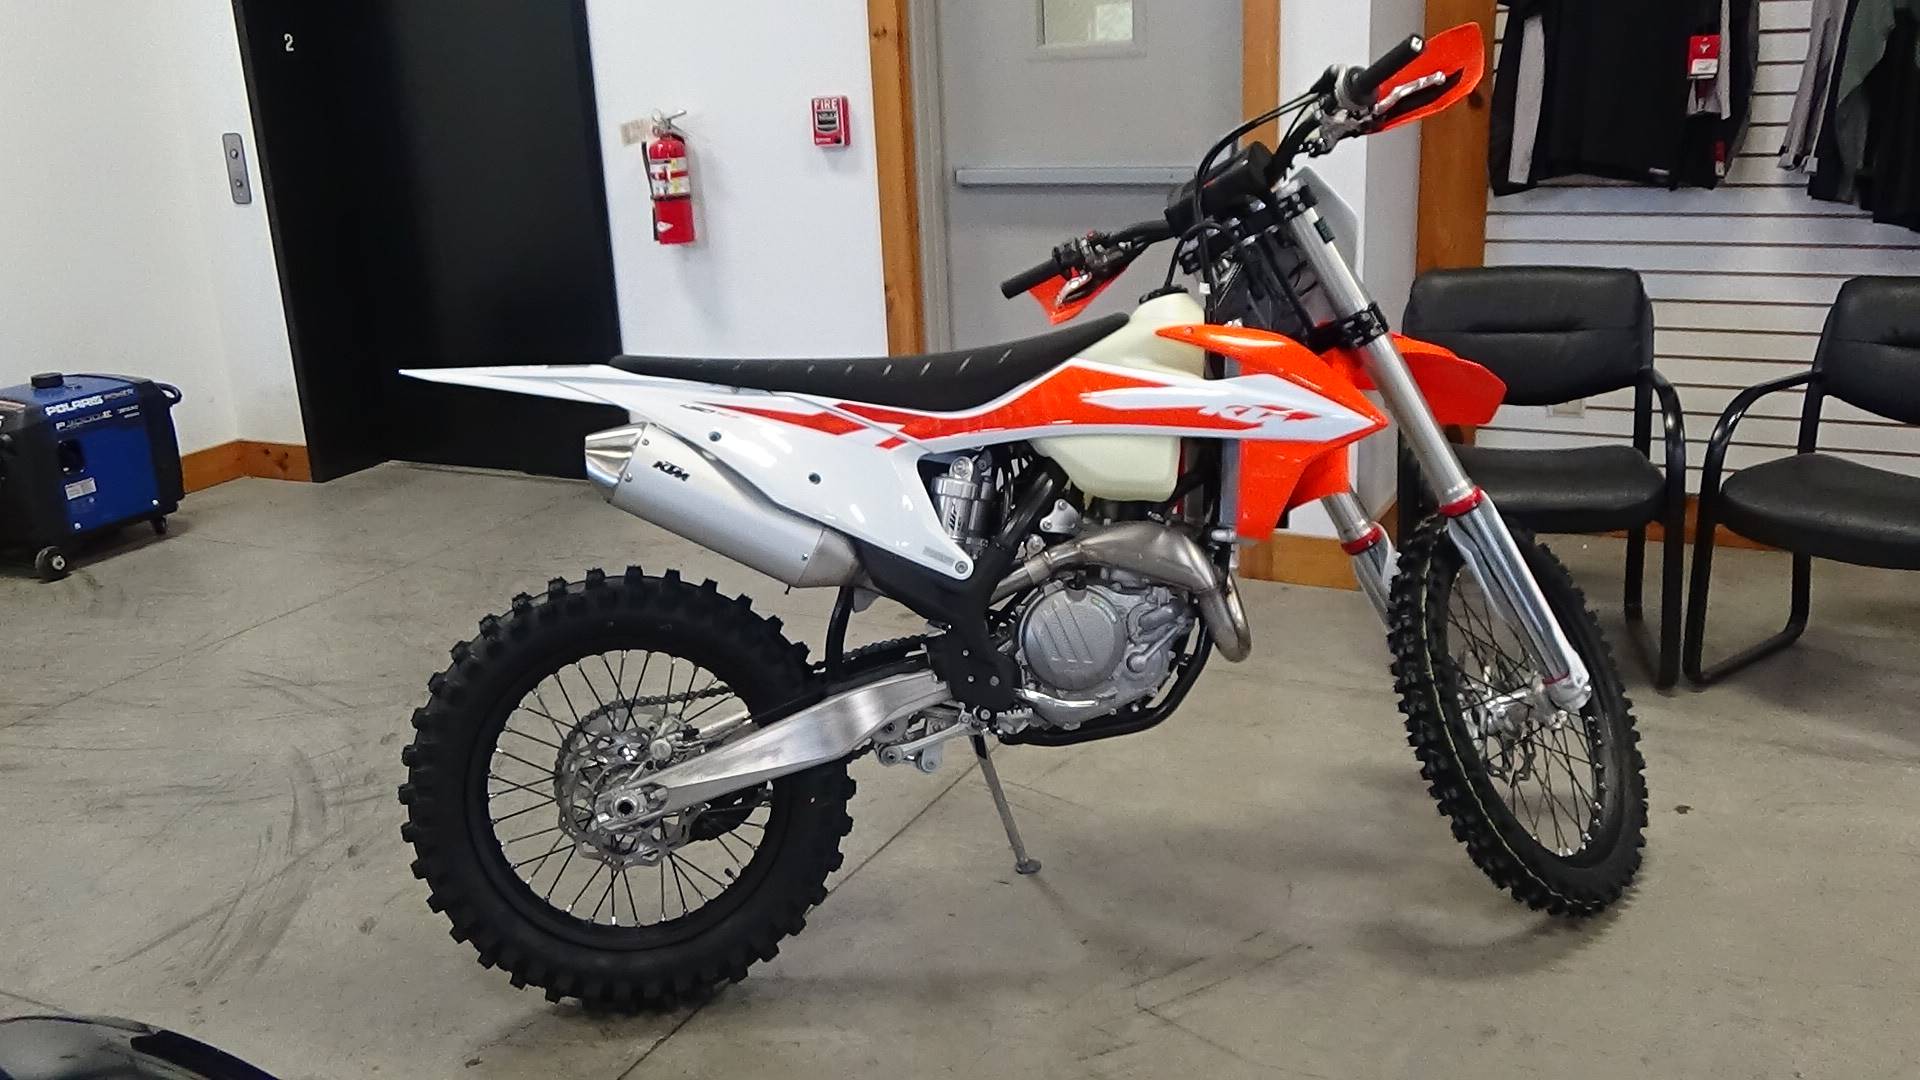 2020 Ktm 450 Xc-F For Sale in Mansfield, OH - Cycle Trader